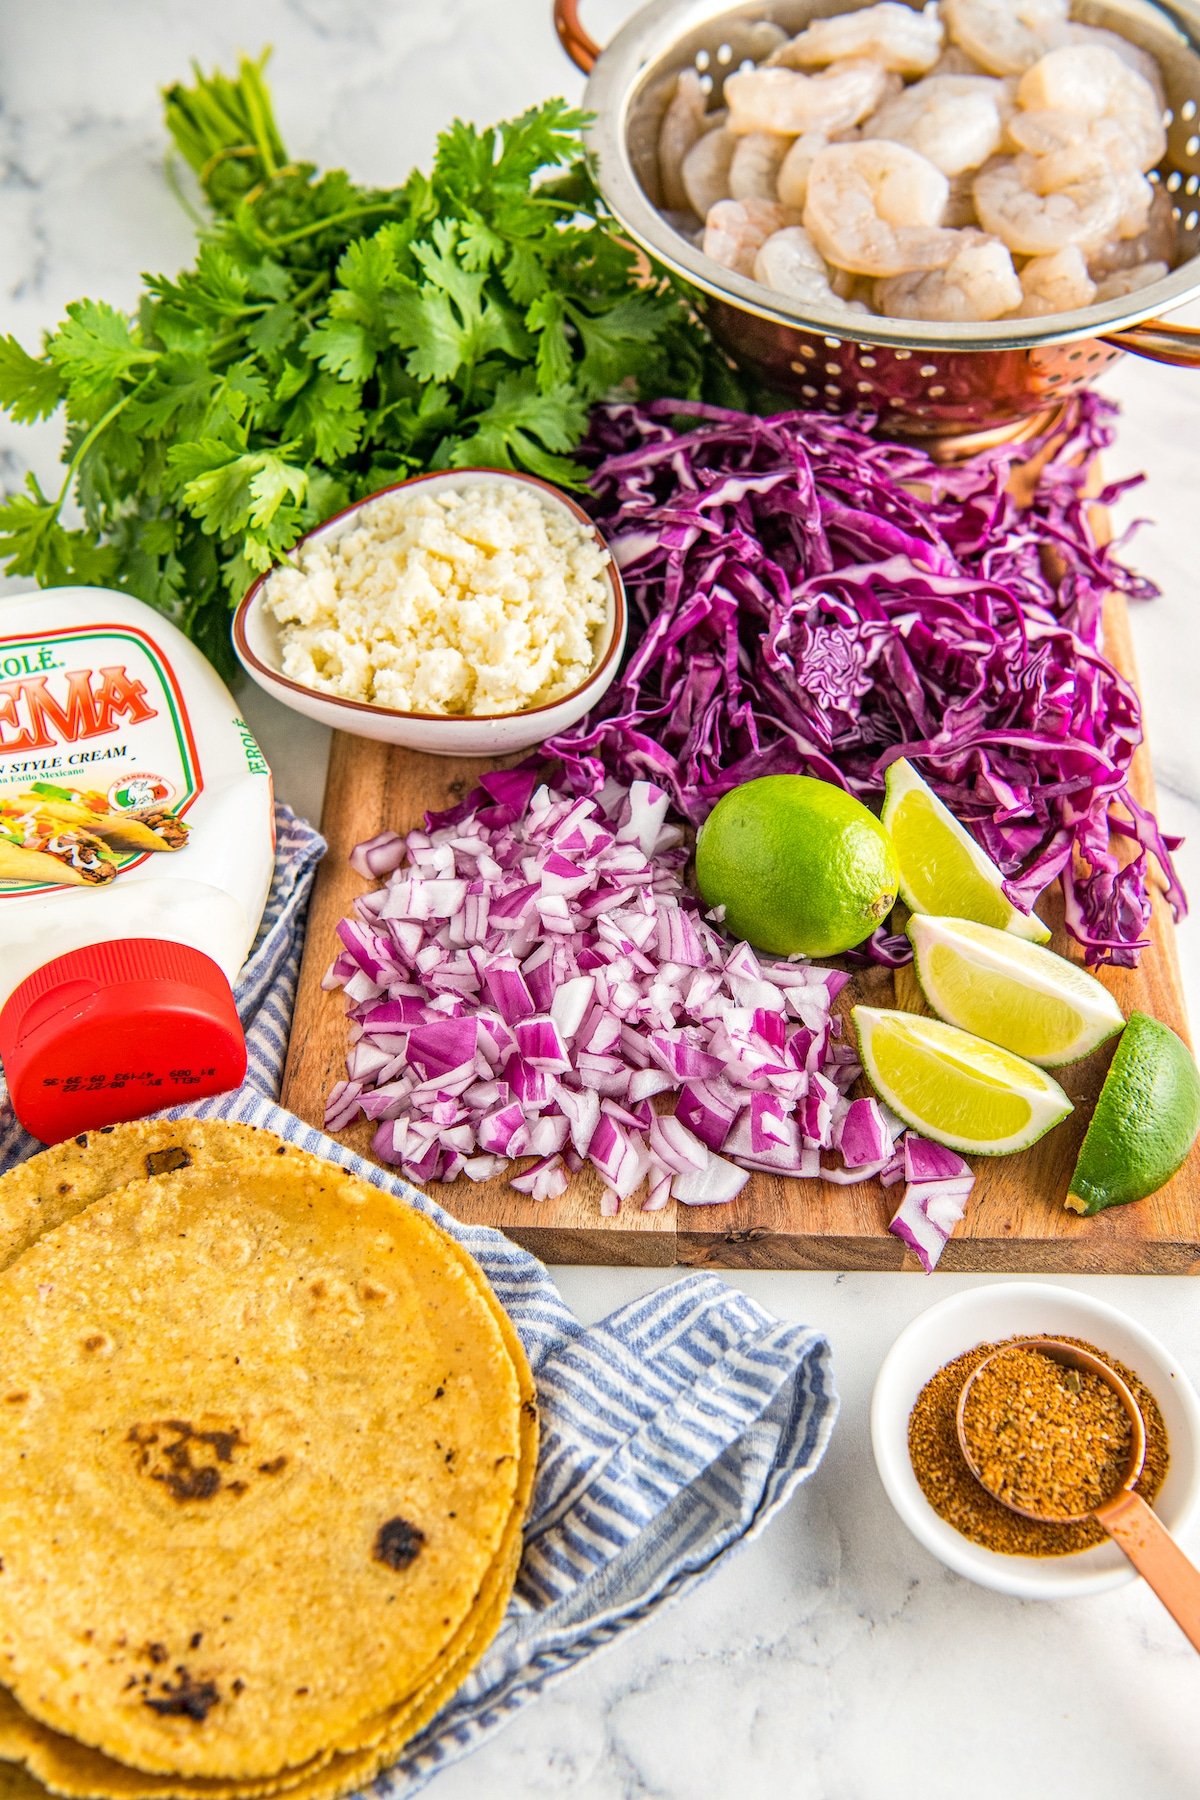 Ingredients for tacos arranged on a cutting board and in bowls.